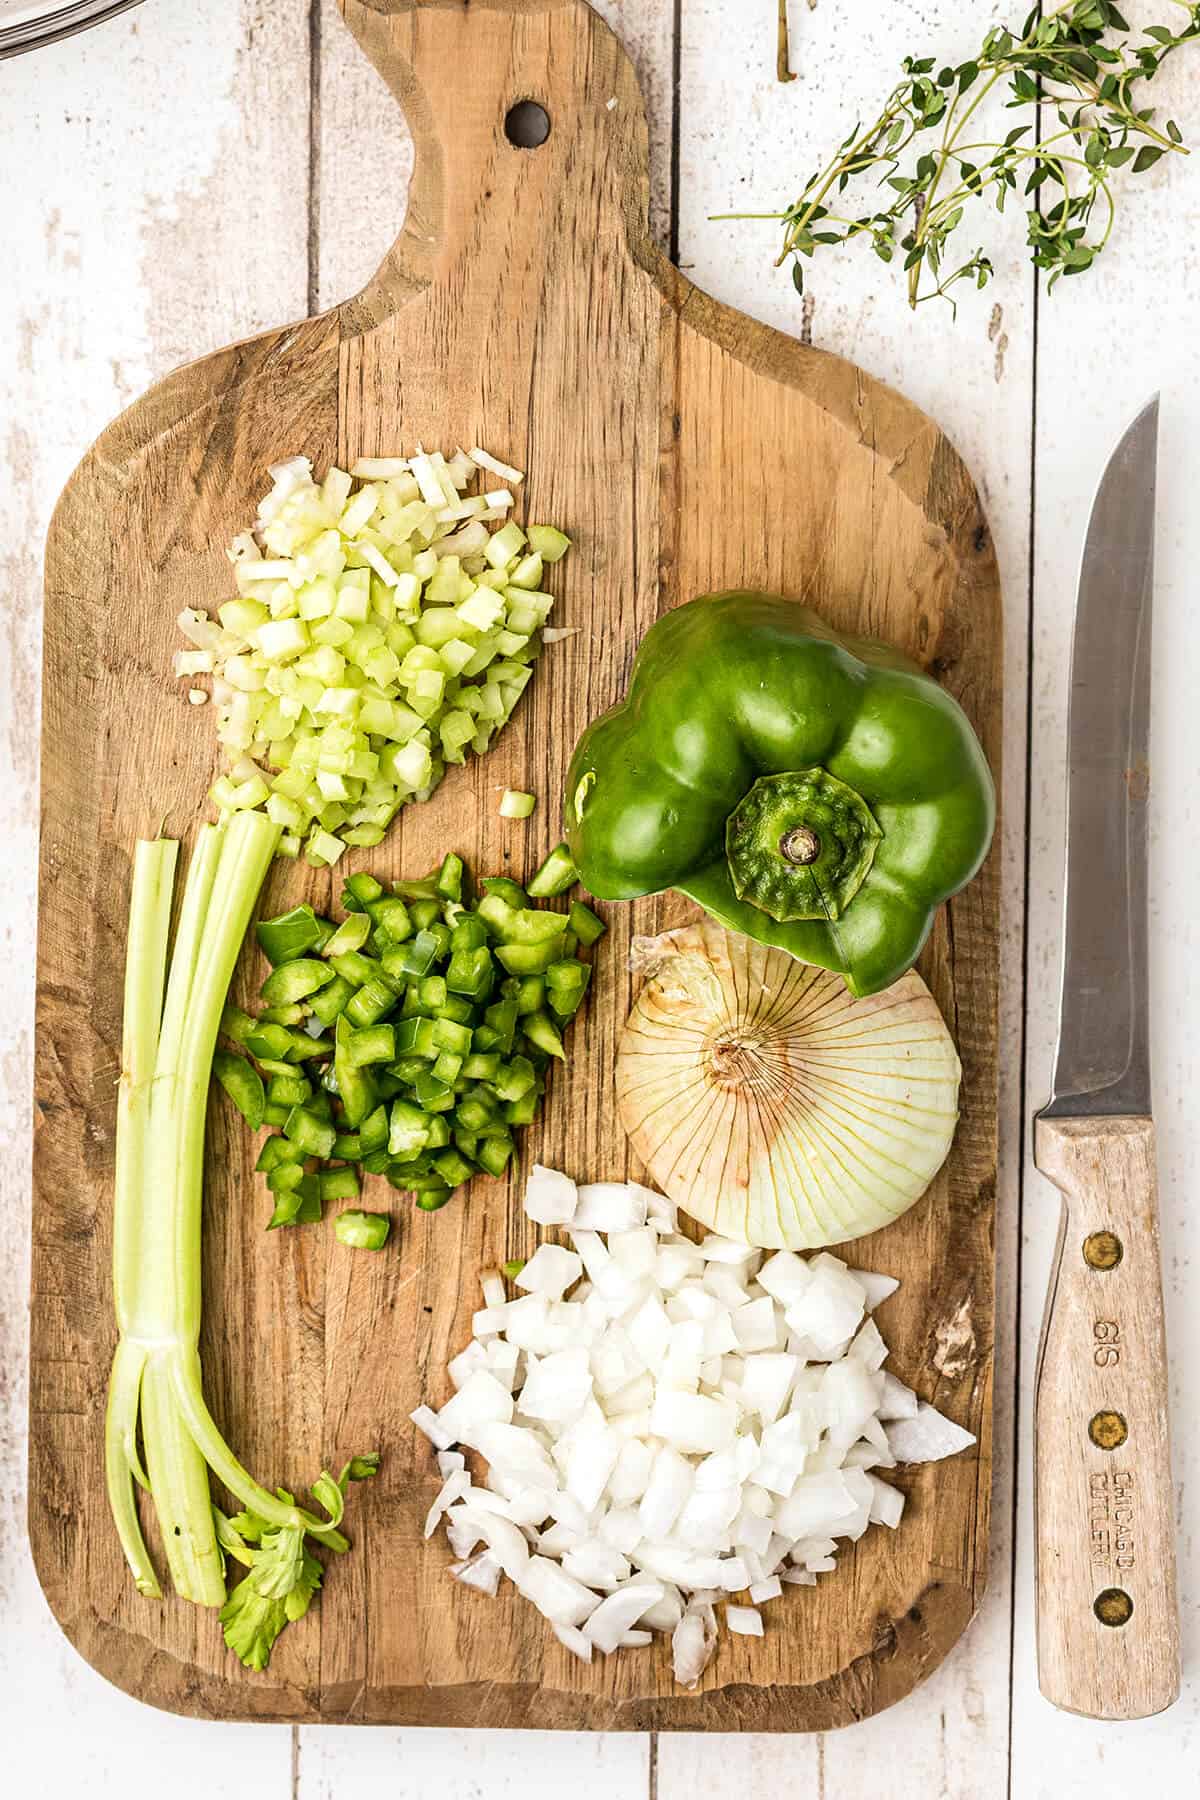 Celery, onion, and bell pepper on a cutting board.